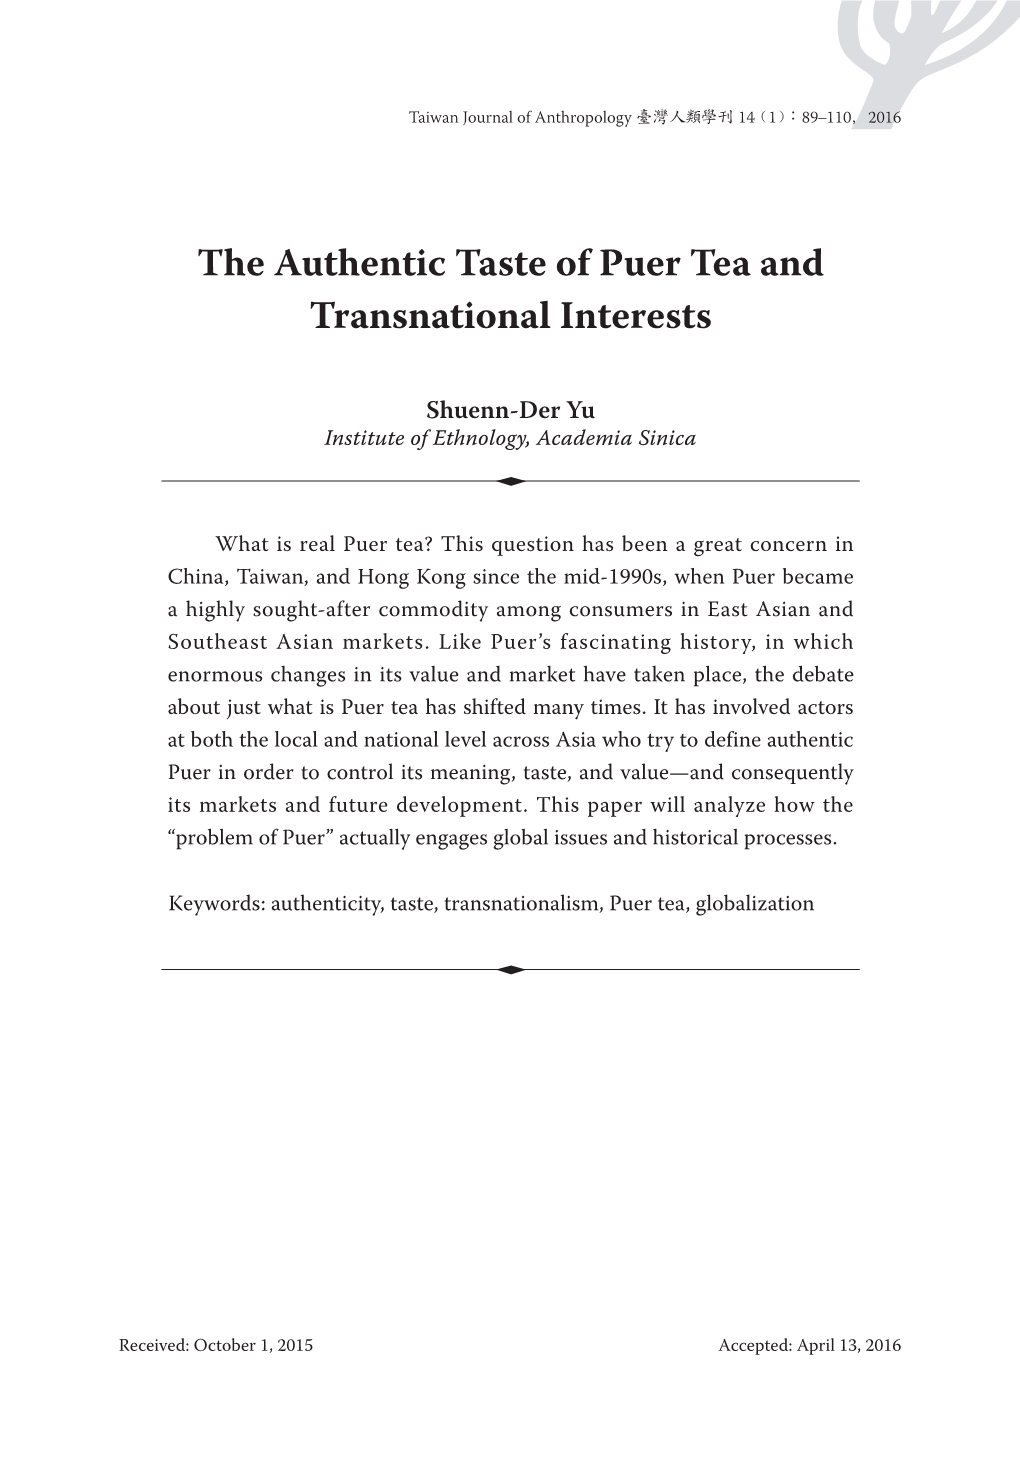 The Authentic Taste of Puer Tea and Transnational Interests